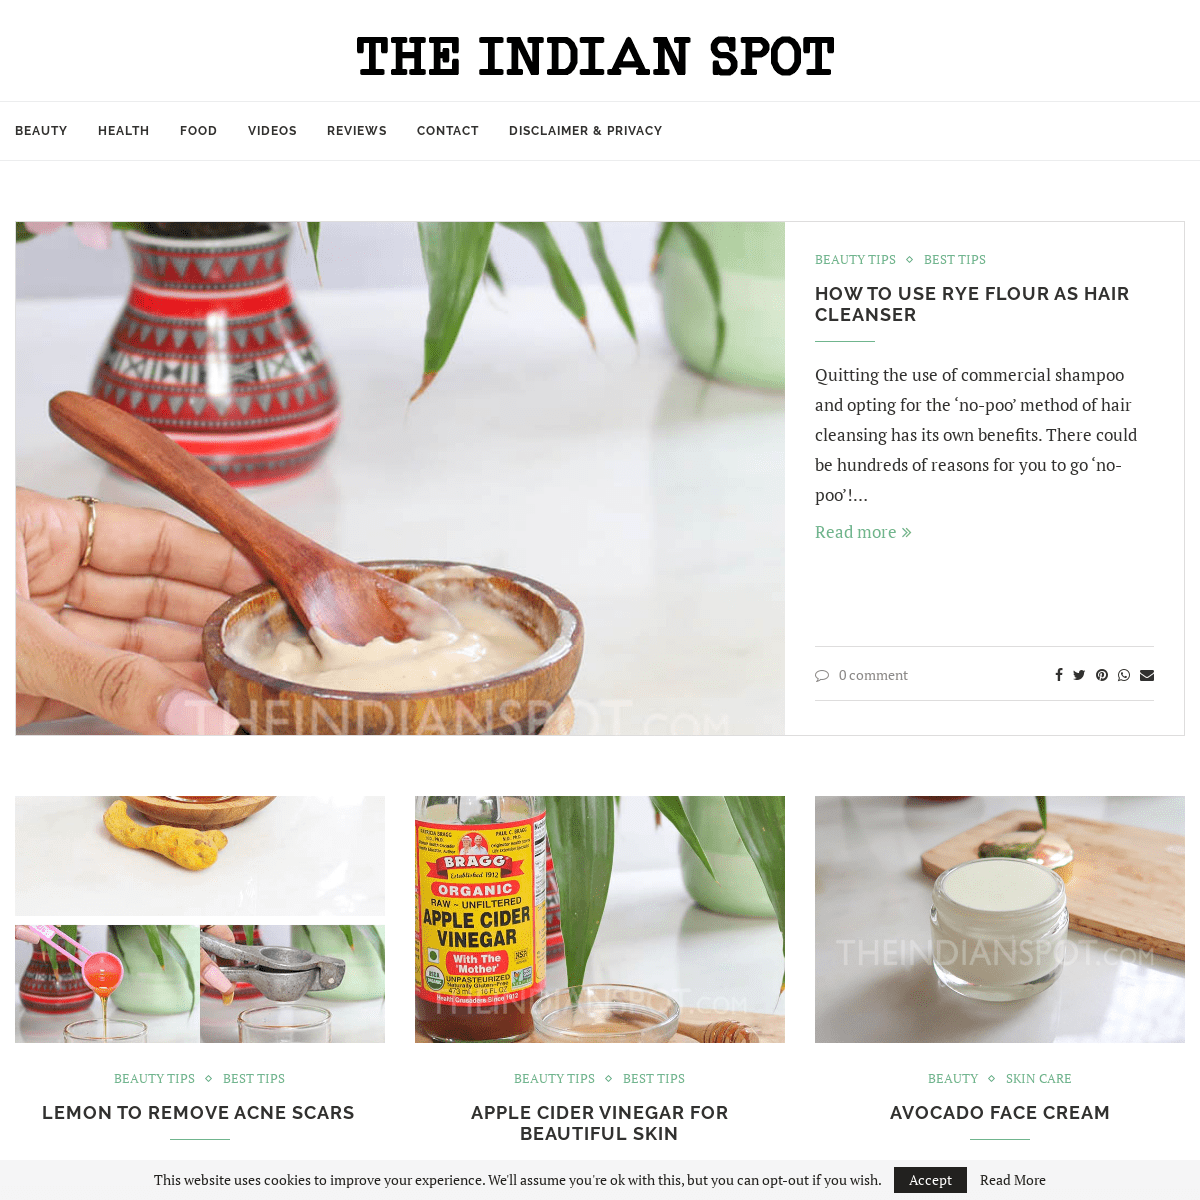 A complete backup of theindianspot.com